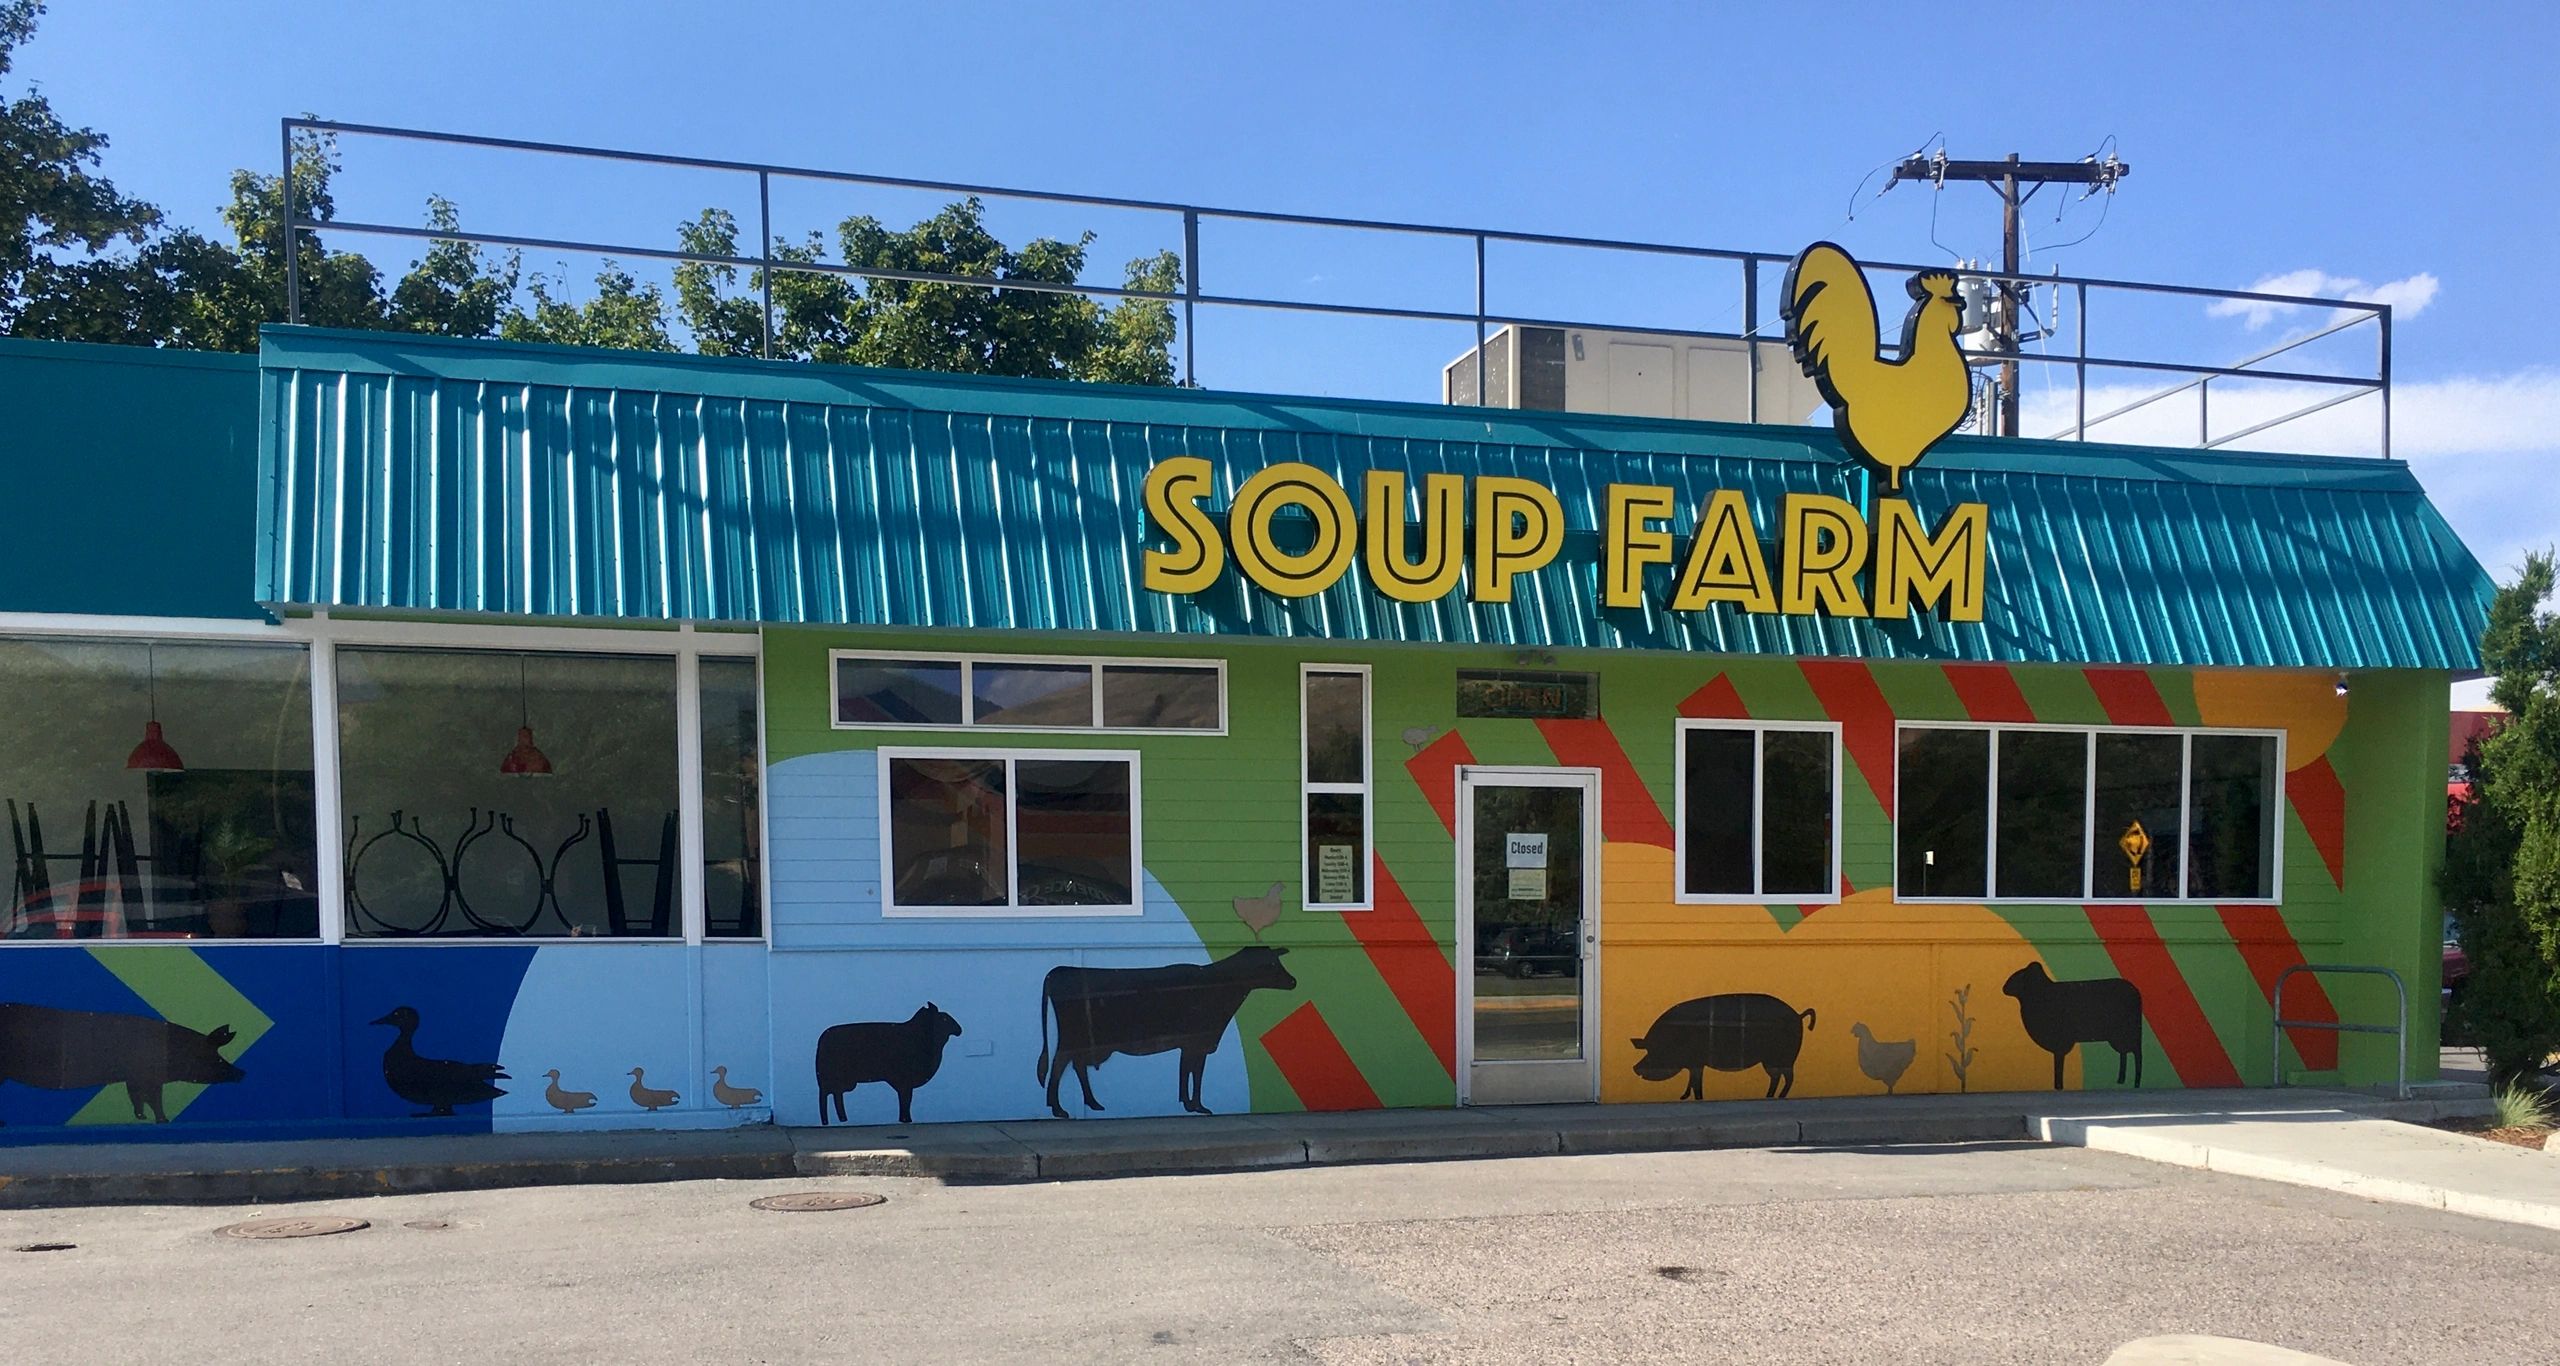 Assisted painting the exterior of the Soup Farm, Missoula, Montana.